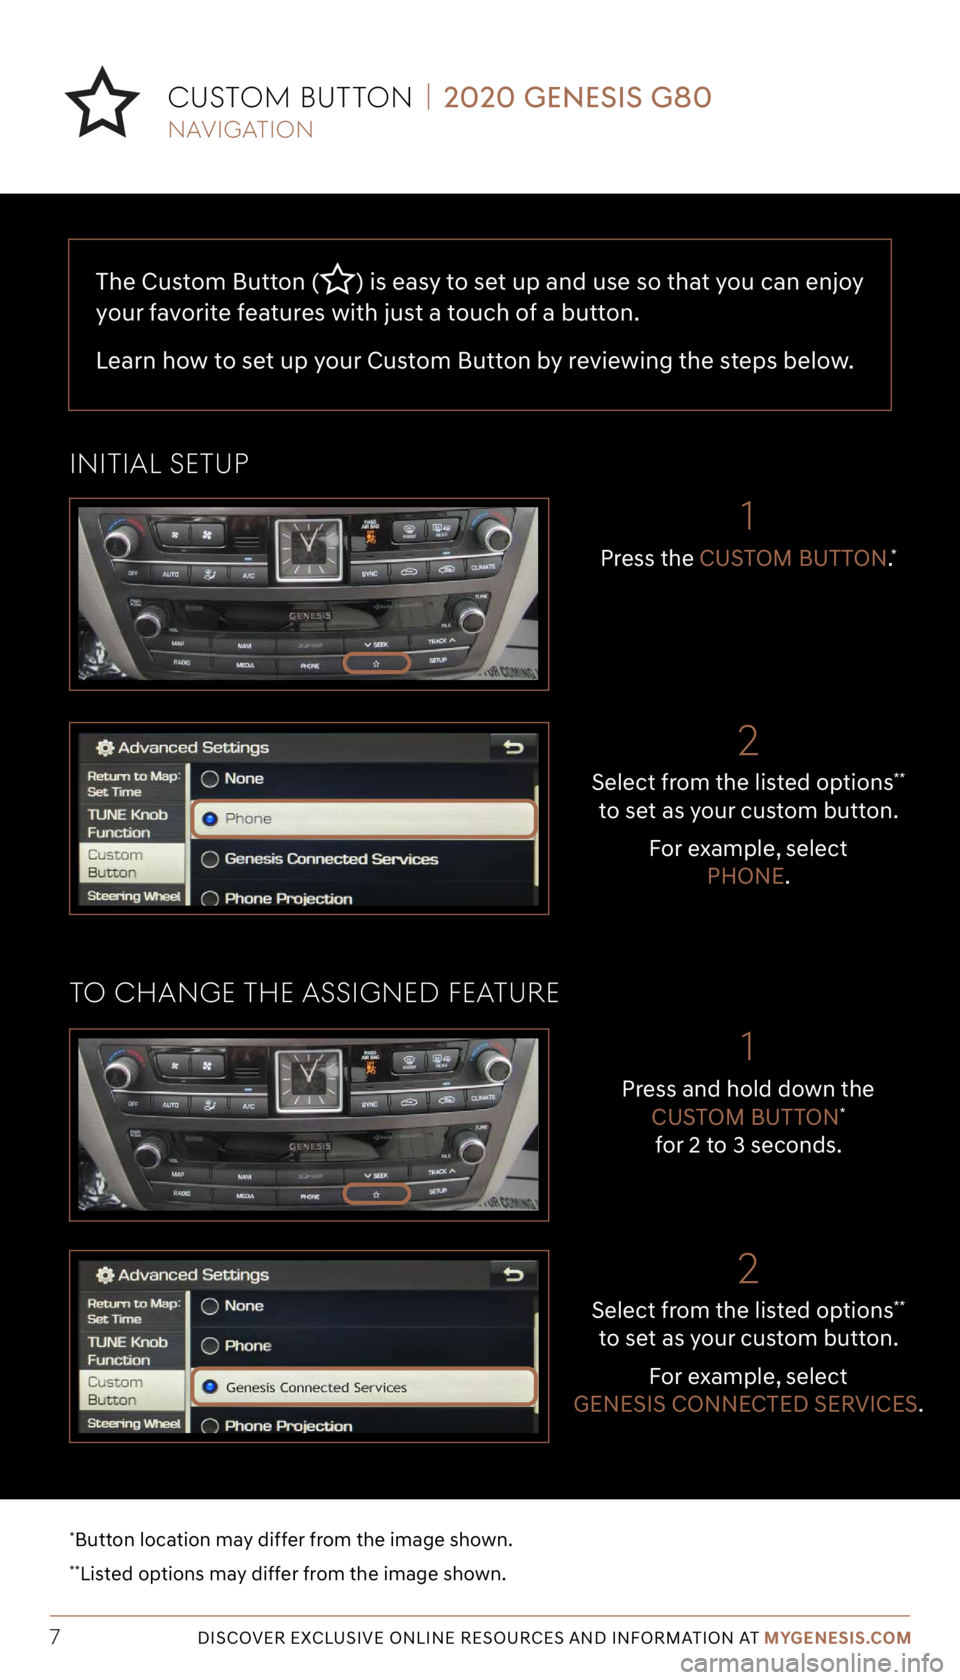 GENESIS G80 2020  Getting Started Guide Tier 1 – VDS Icons
Voice
Activation Bluetooth
TPMSBatter\f Window
\befog 1 Window
\befog 2
App ClockSteering
Adjustments Light
Gear
Seat 
Adjusting Air
Media 1 Fuel
Automatic
Transmission Manual
Tra